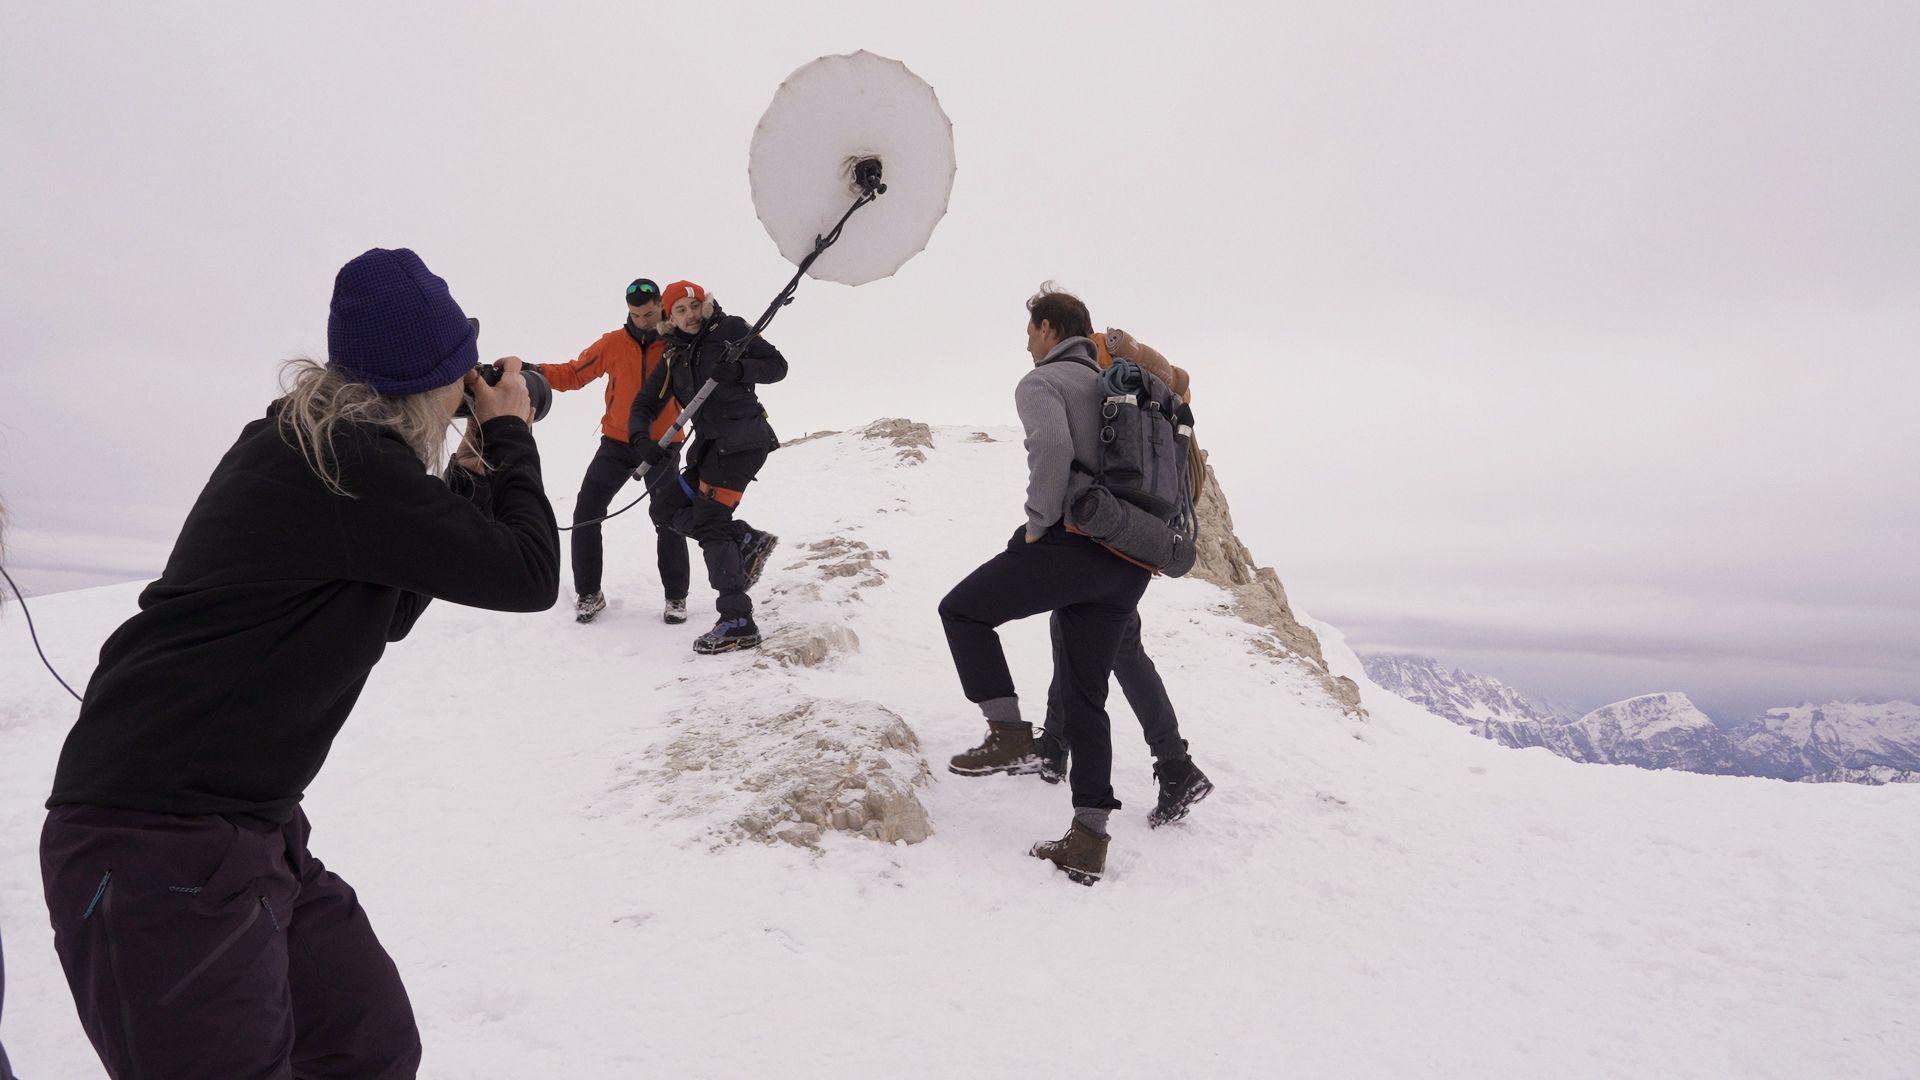 Annie Leibovitz shooting Roger Federer and Rafael Nadal on top of a snowy mountain